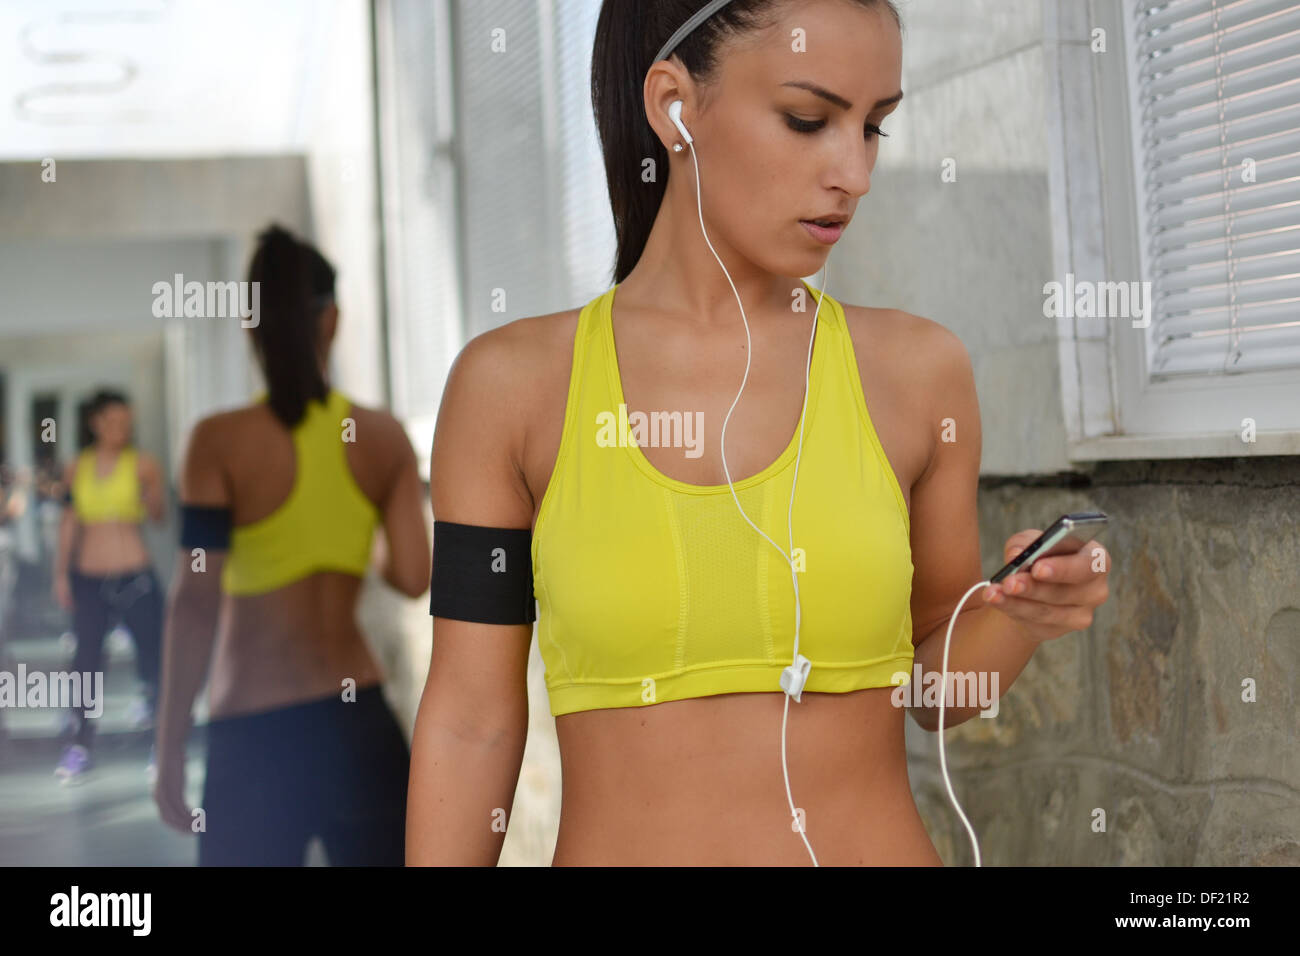 working out in the fitness studio Stock Photo